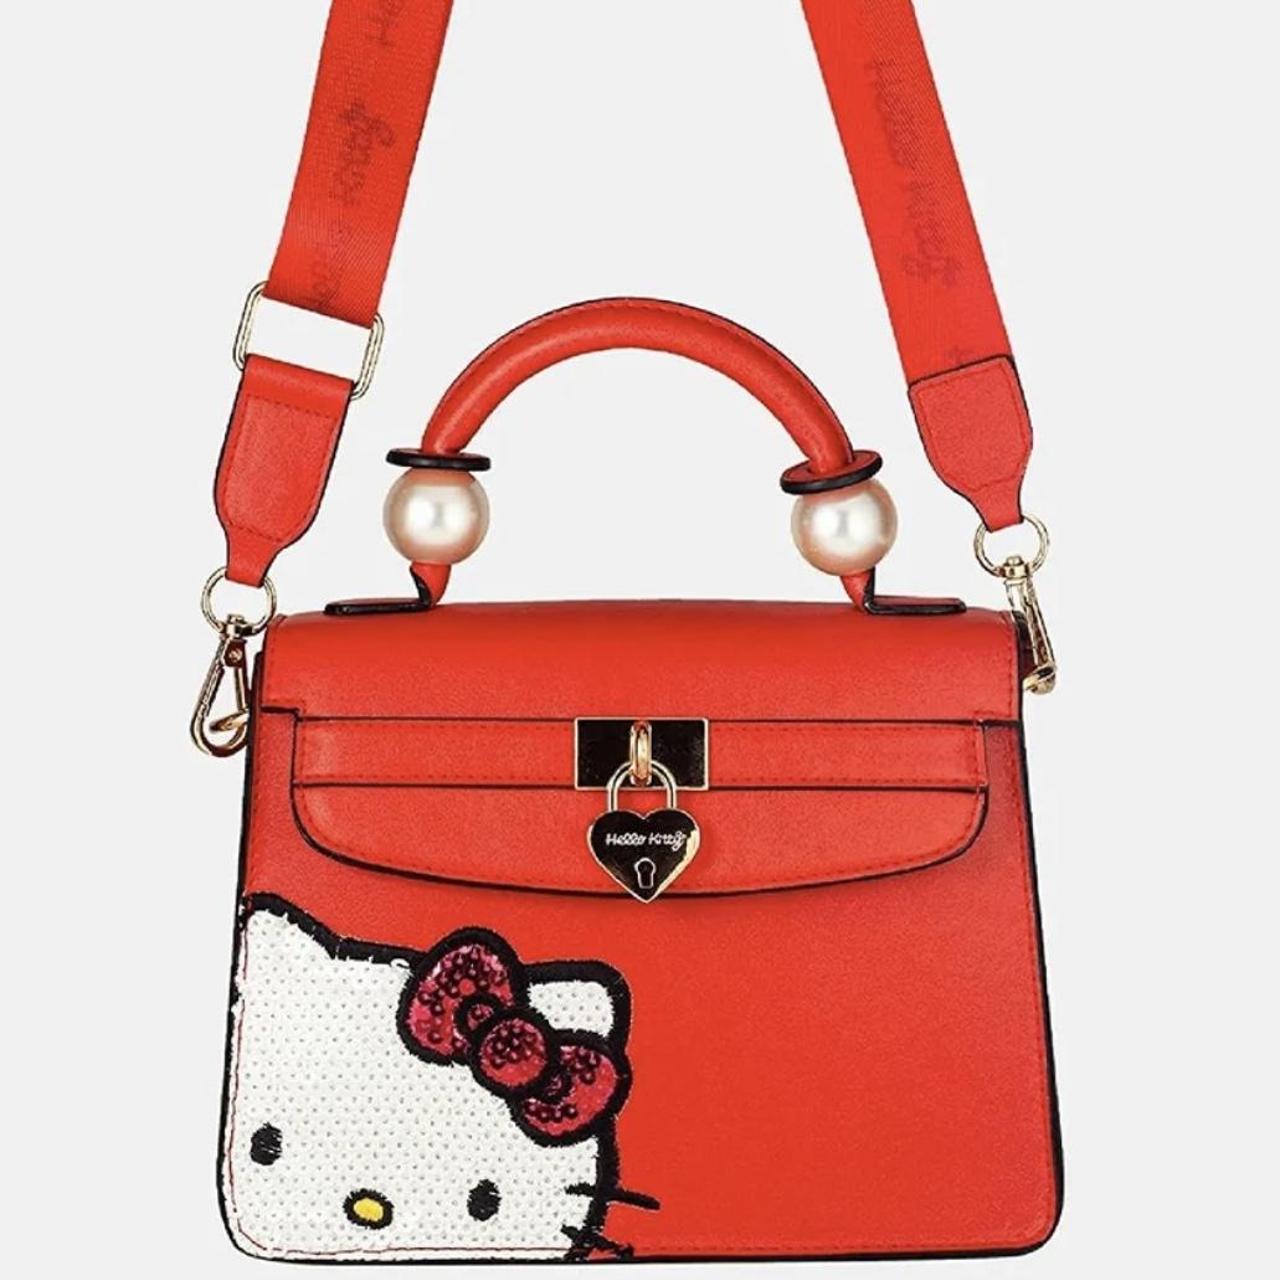 Hello kitty messenger bag New with tags Some very - Depop